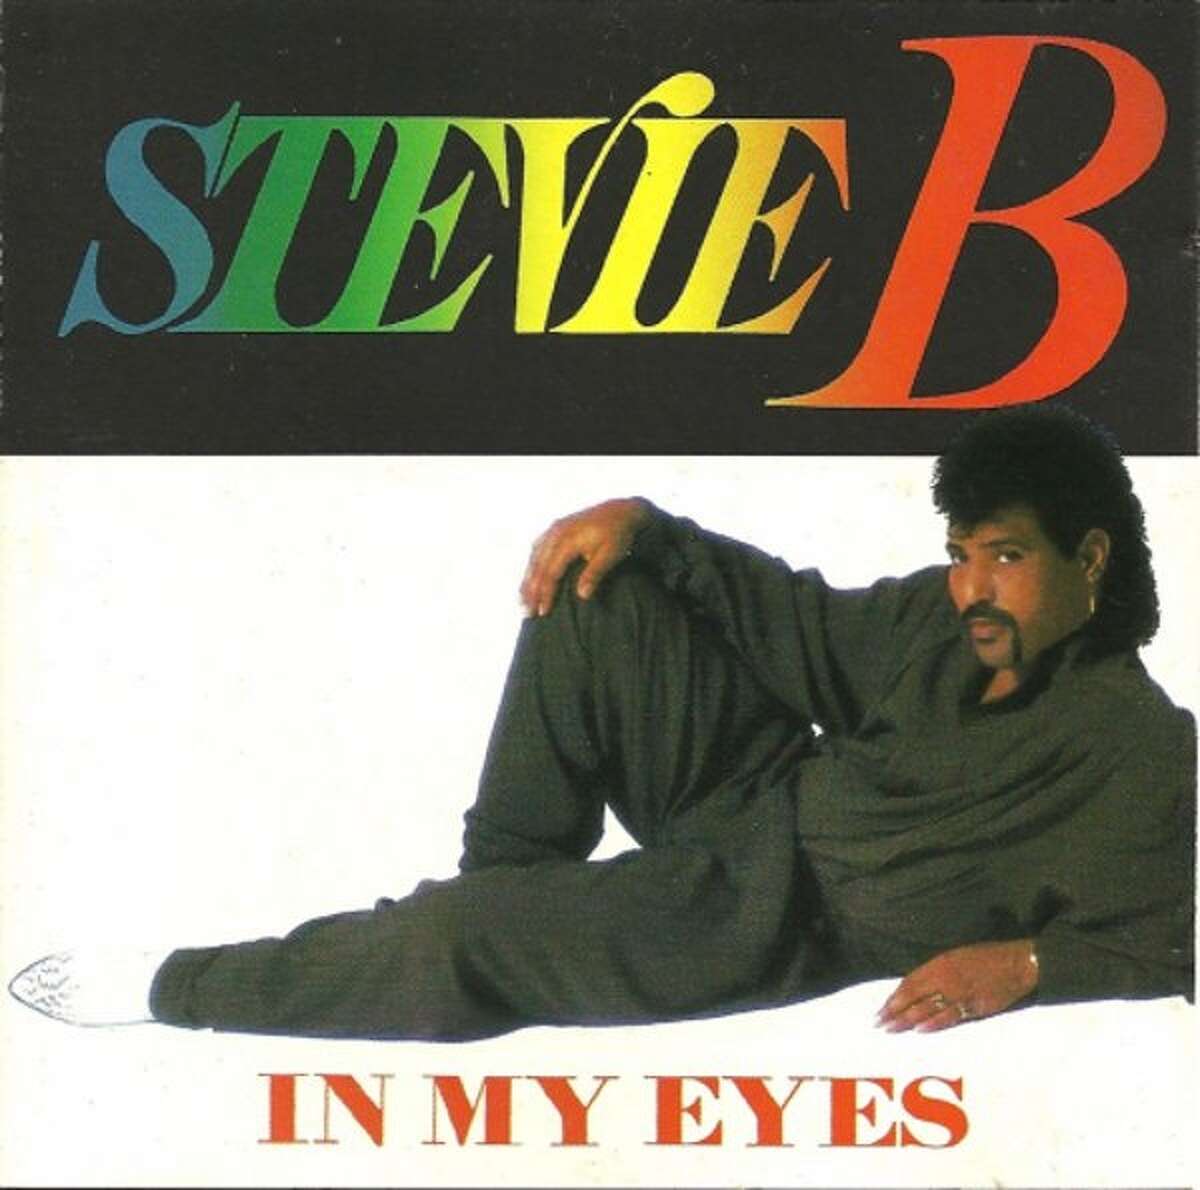 Stevie B: "Party Your Body," "Spring Love (Come Back to Me)," "In My Eyes"